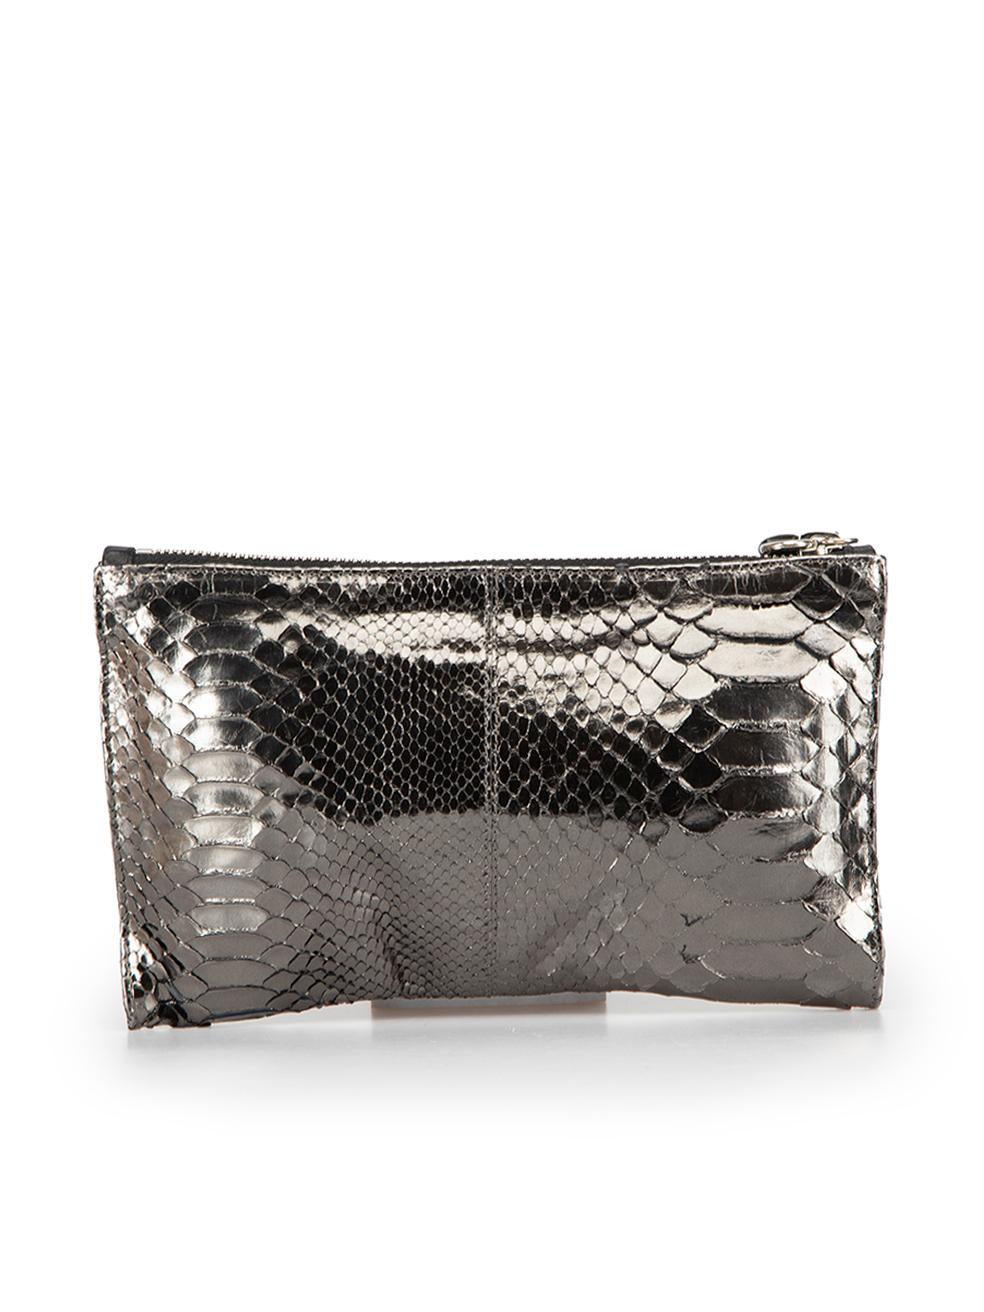 Chloé Metallic Gunmetal Python Skin Clutch In Excellent Condition For Sale In London, GB